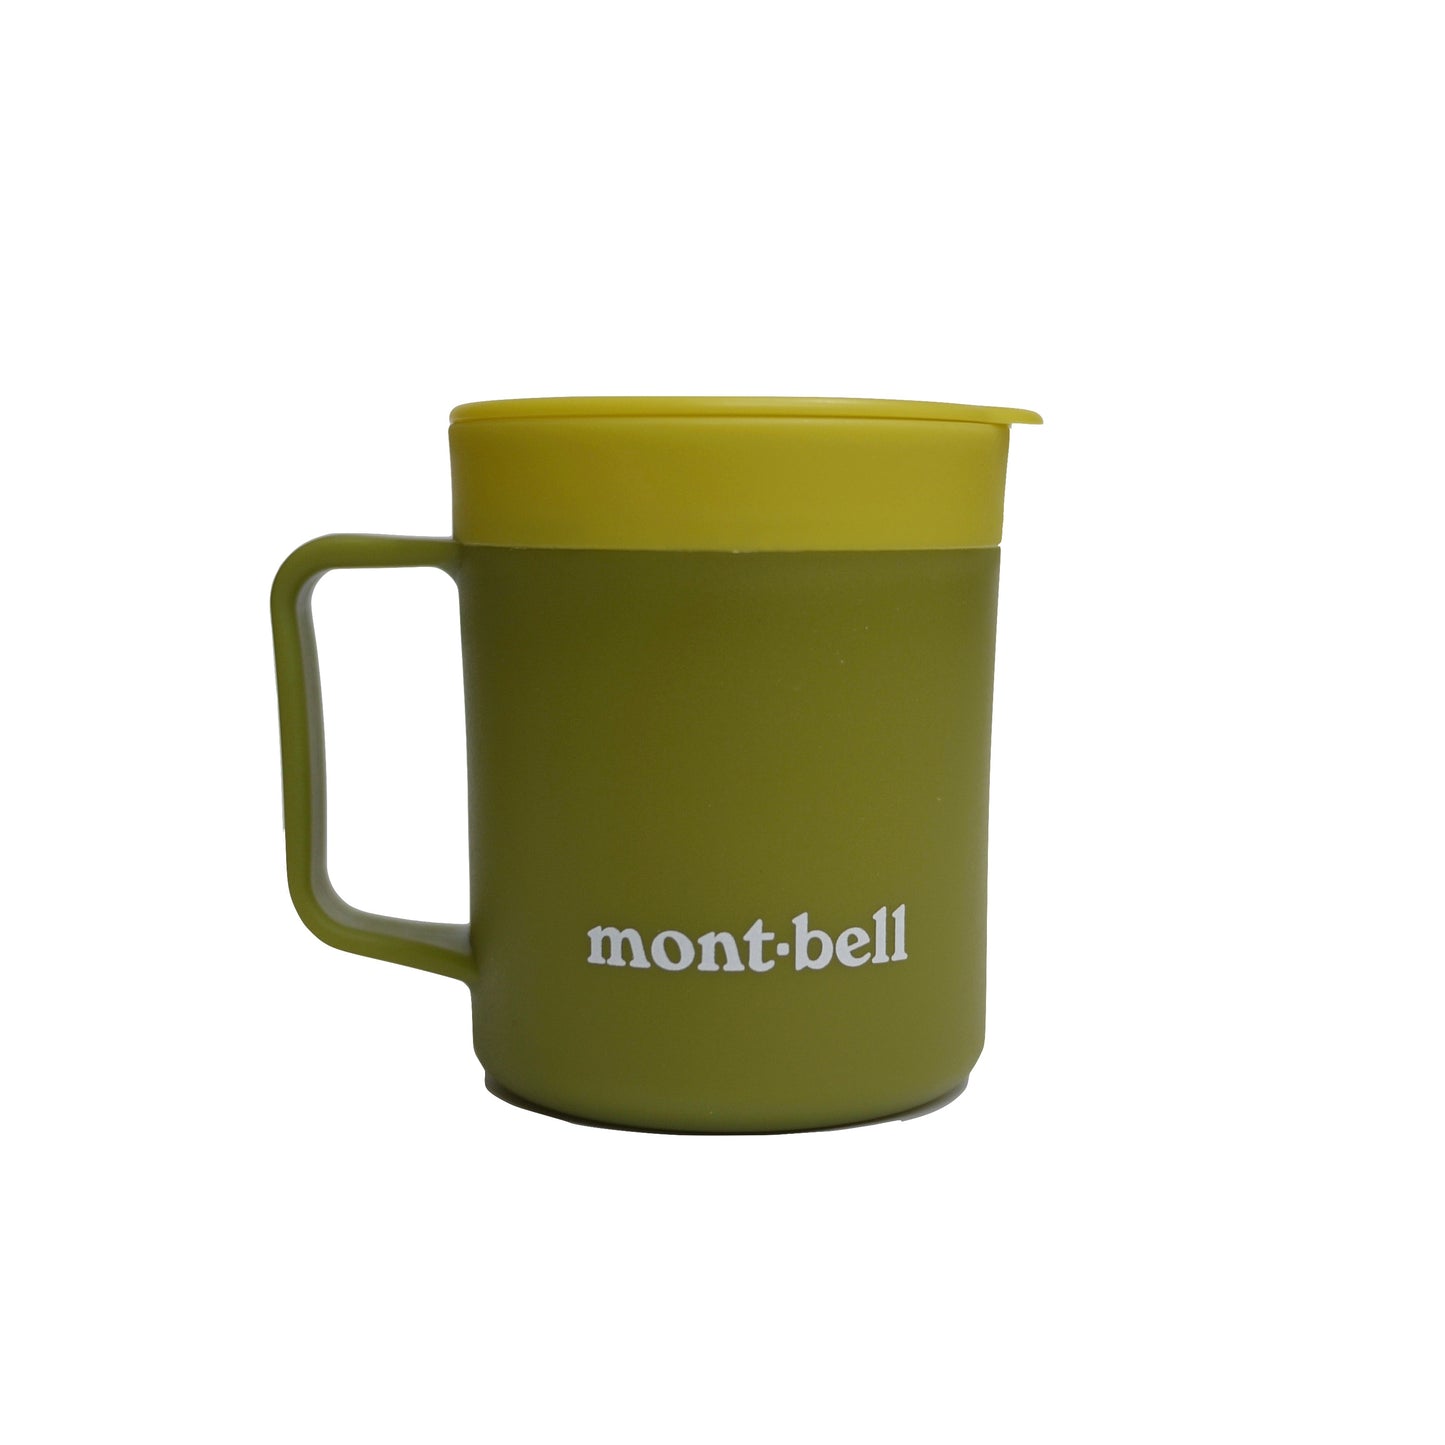 【mont-bell】Thermo Mug 200 mont-bell Logo